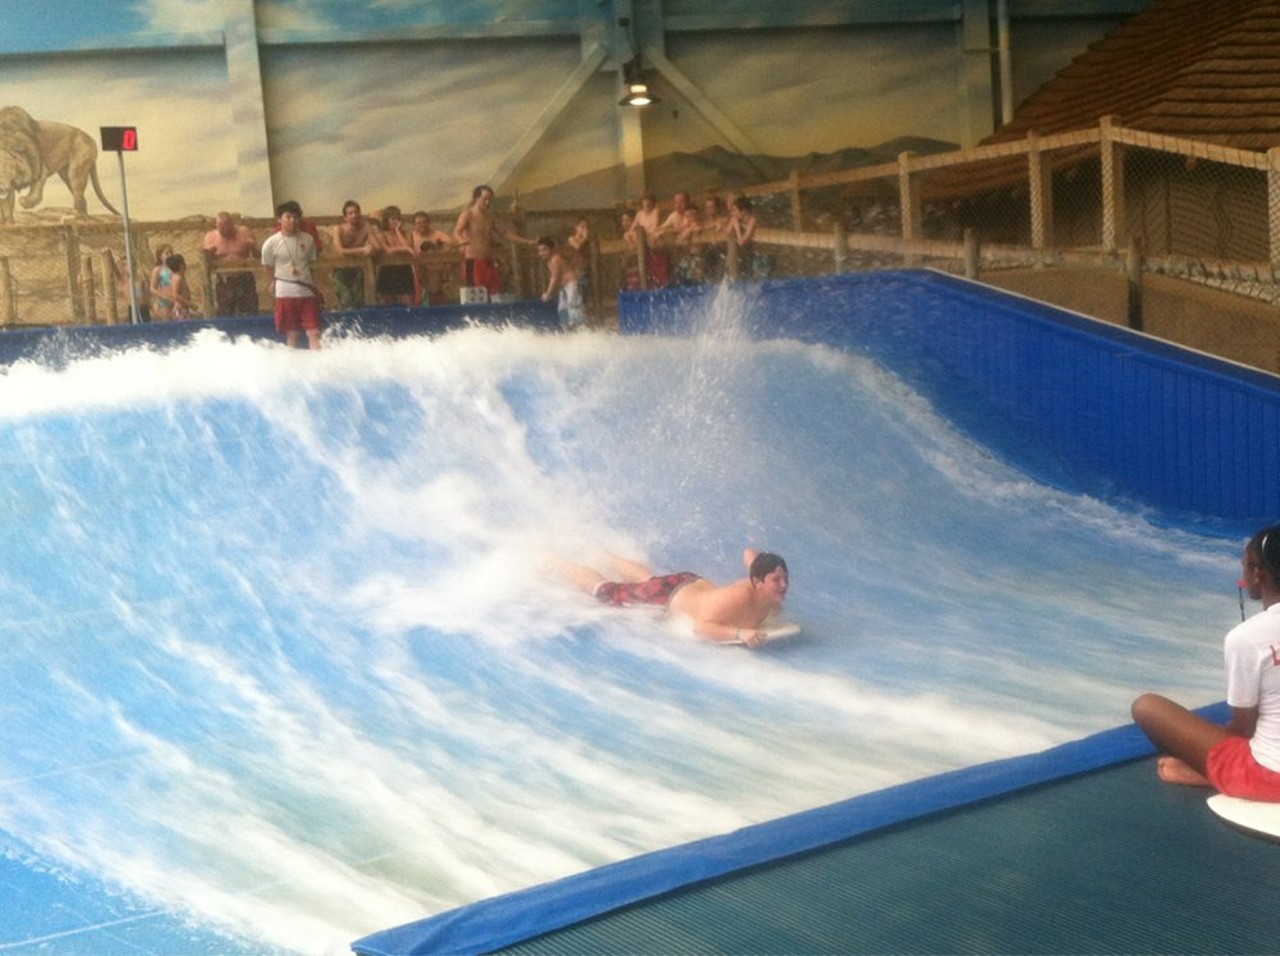 Kalahari Resort in Sandusky - Still a tad too cold for the beach for you? Try taking the fun indoors to Kalahari Resort in Sandusky. It's also one of the biggest indoor waterparks in the U.S. and only getting bigger.